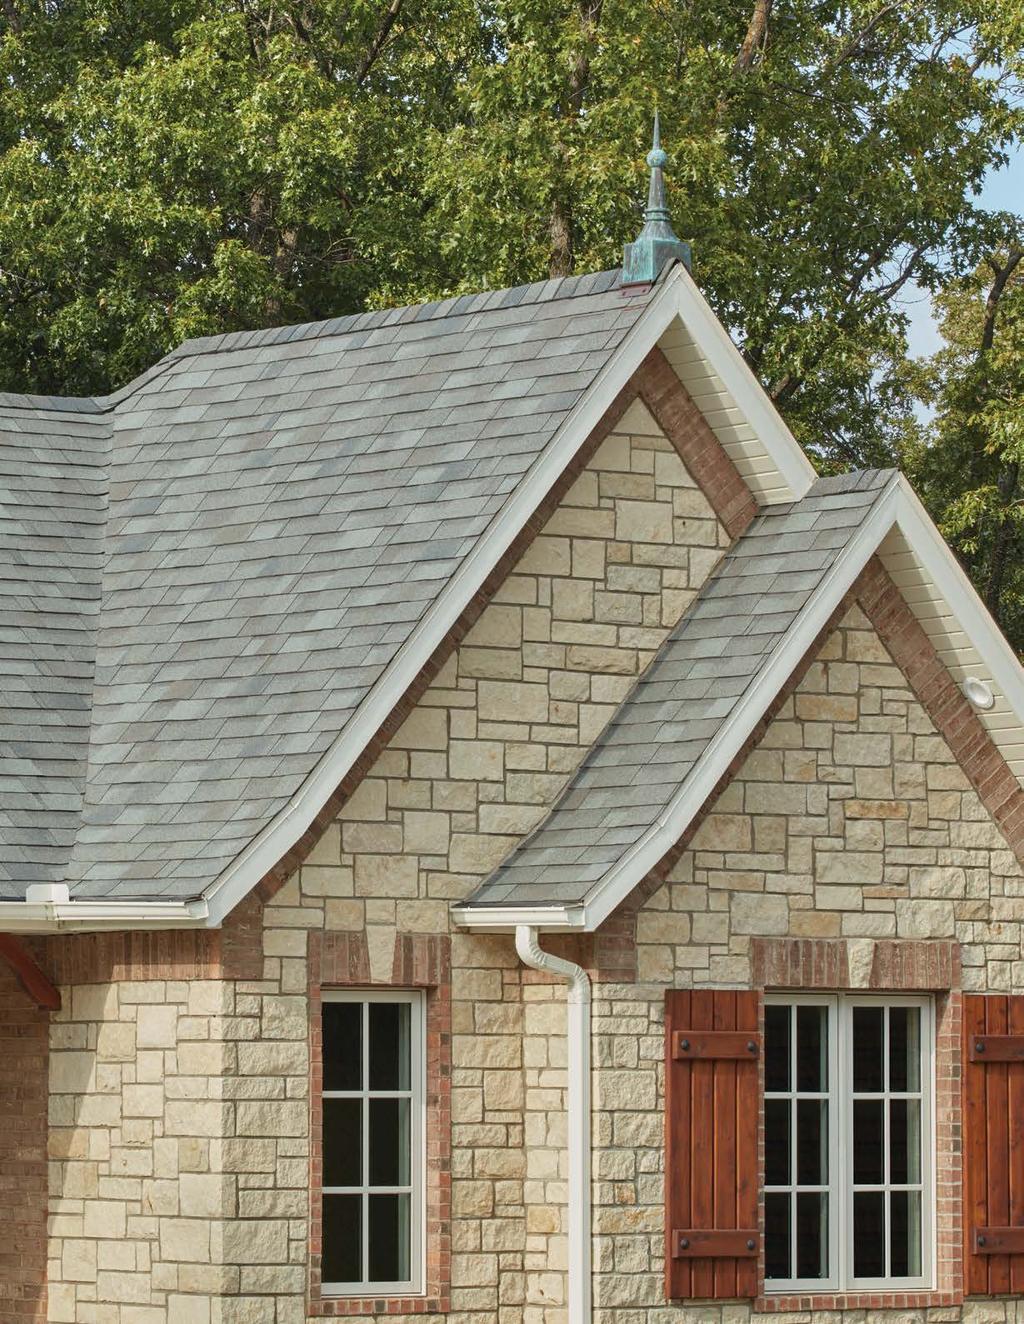 HERITAGE WOODGATE Antique Wood NOTE: TAMKO RECOMMENDS VIEWING AN ACTUAL ROOF INSTALLATION OF THE SAME COLOR AND MANUFACTURING LOCATION YOU ARE CONSIDERING PRIOR TO MAKING YOUR FINAL COLOR SELECTION